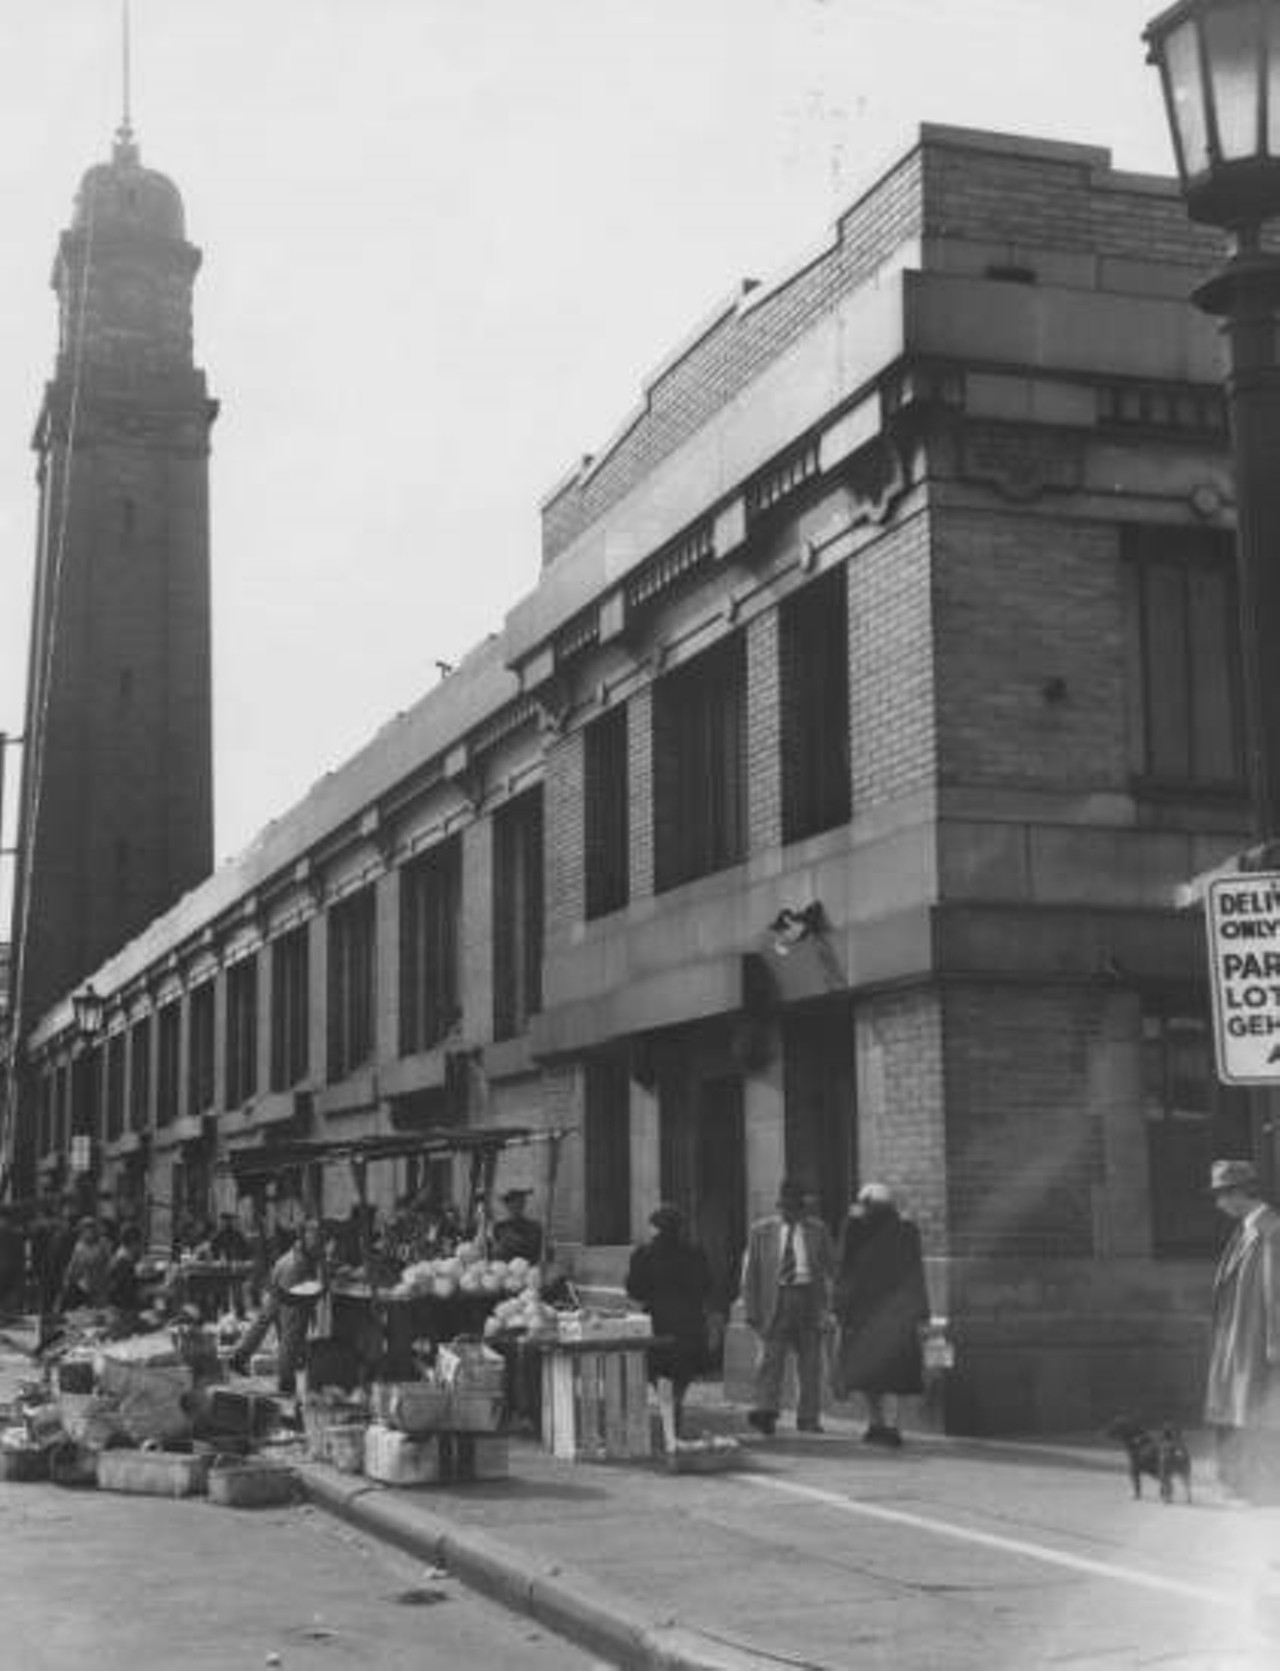 View of south side of market building and produce vendors located along the Lorain Avenue sidewalk. c. 1946